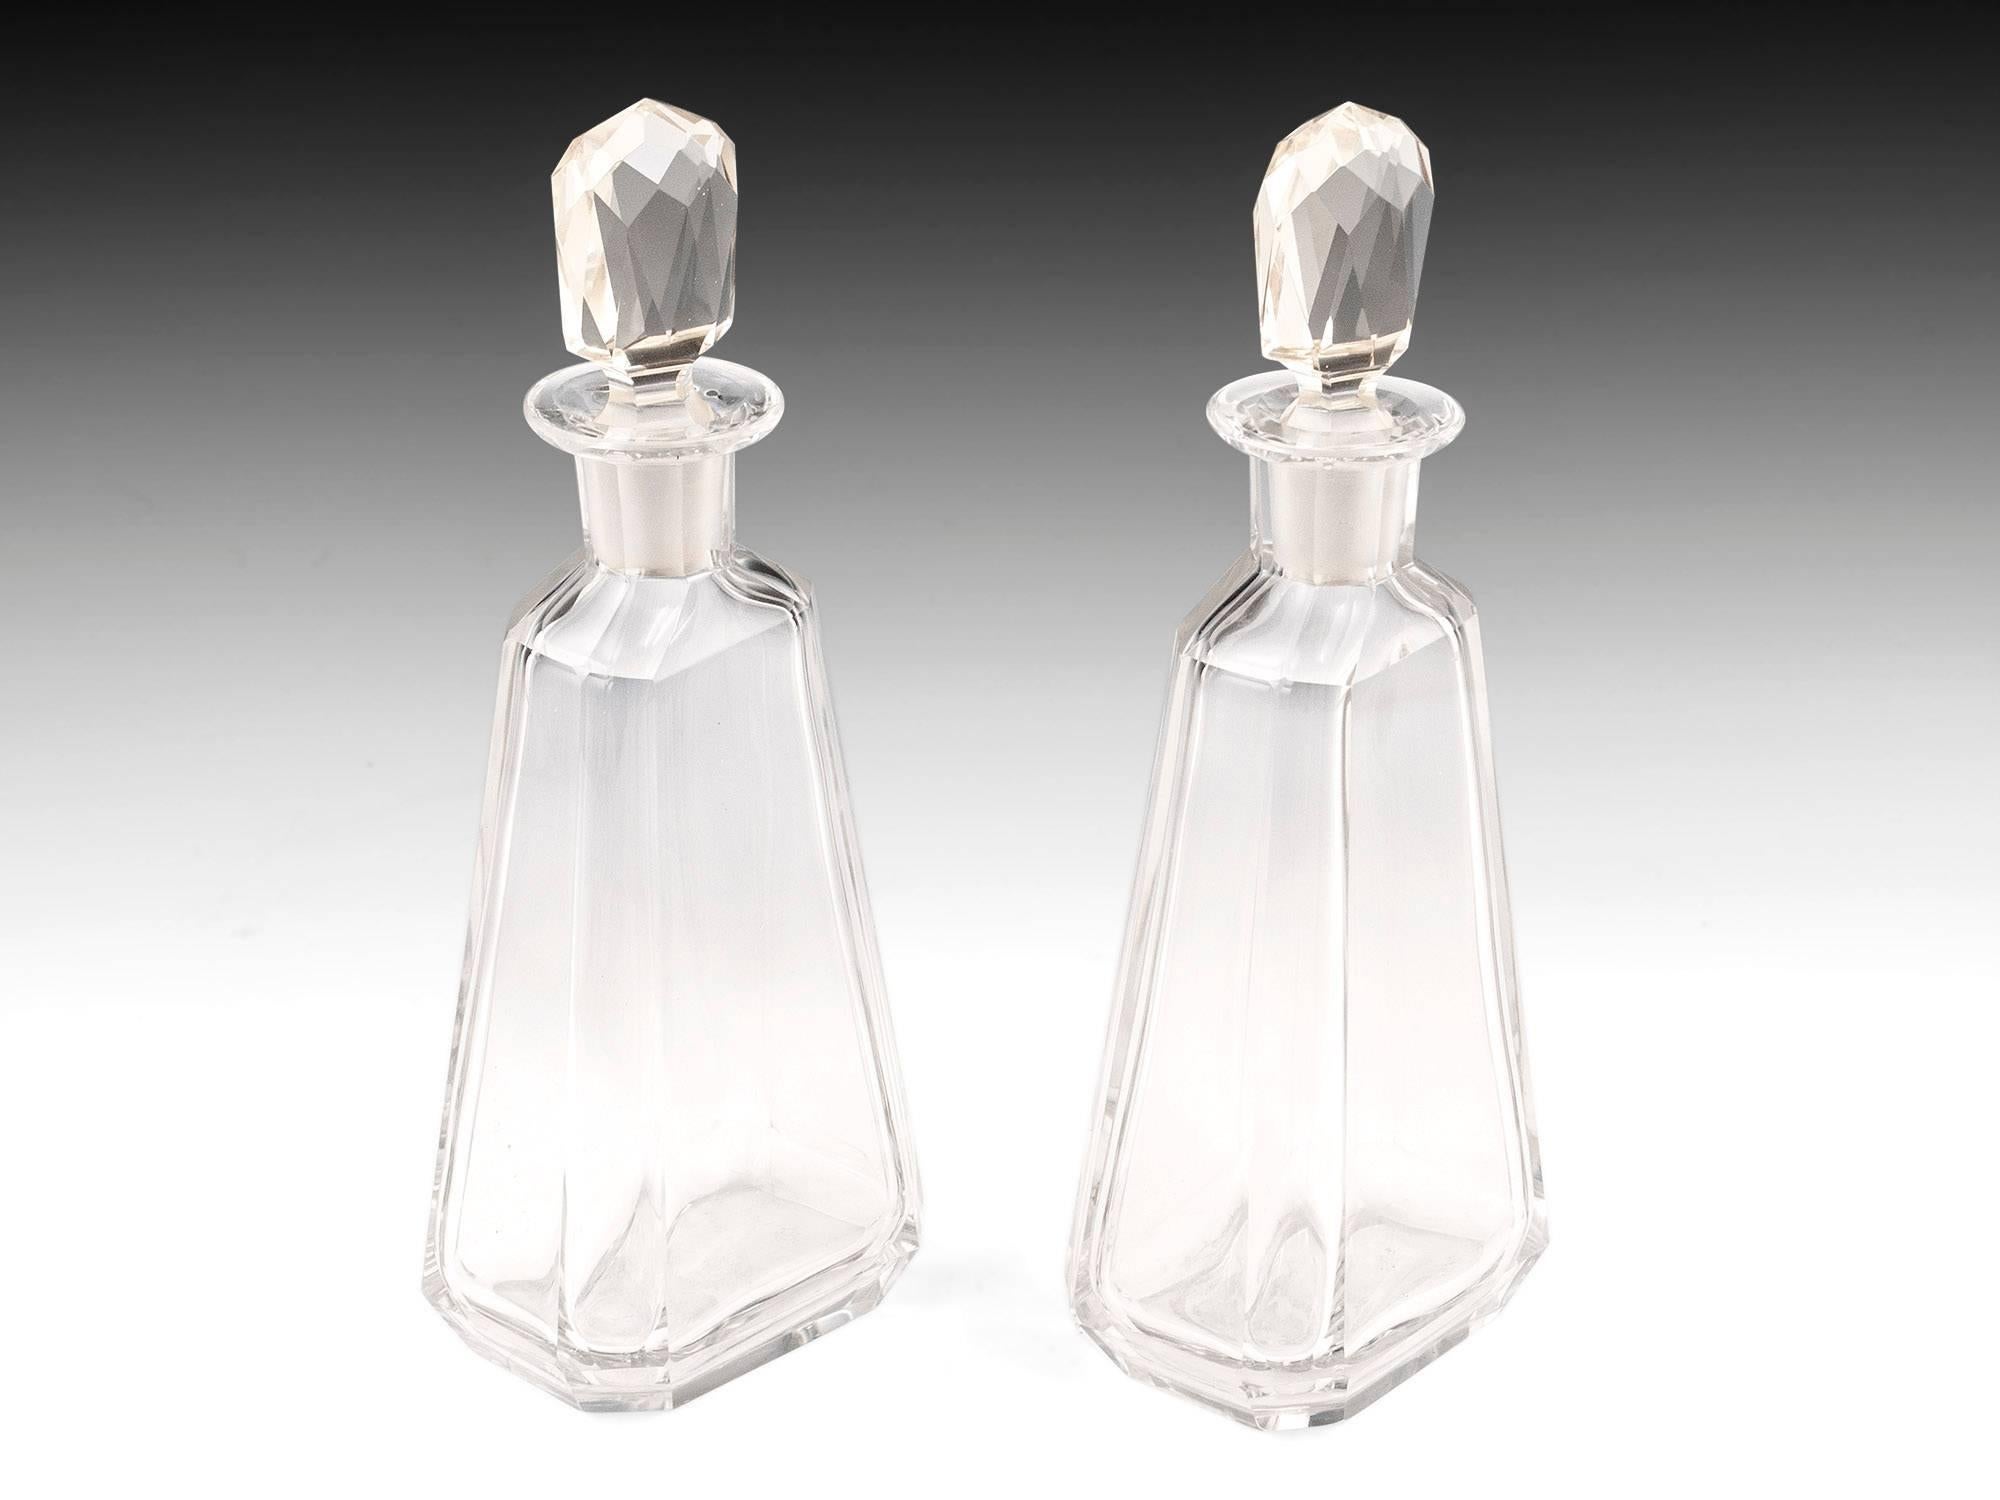 Great Britain (UK) Pair of Stylish Art Deco Glass Lead Crystal Decanters